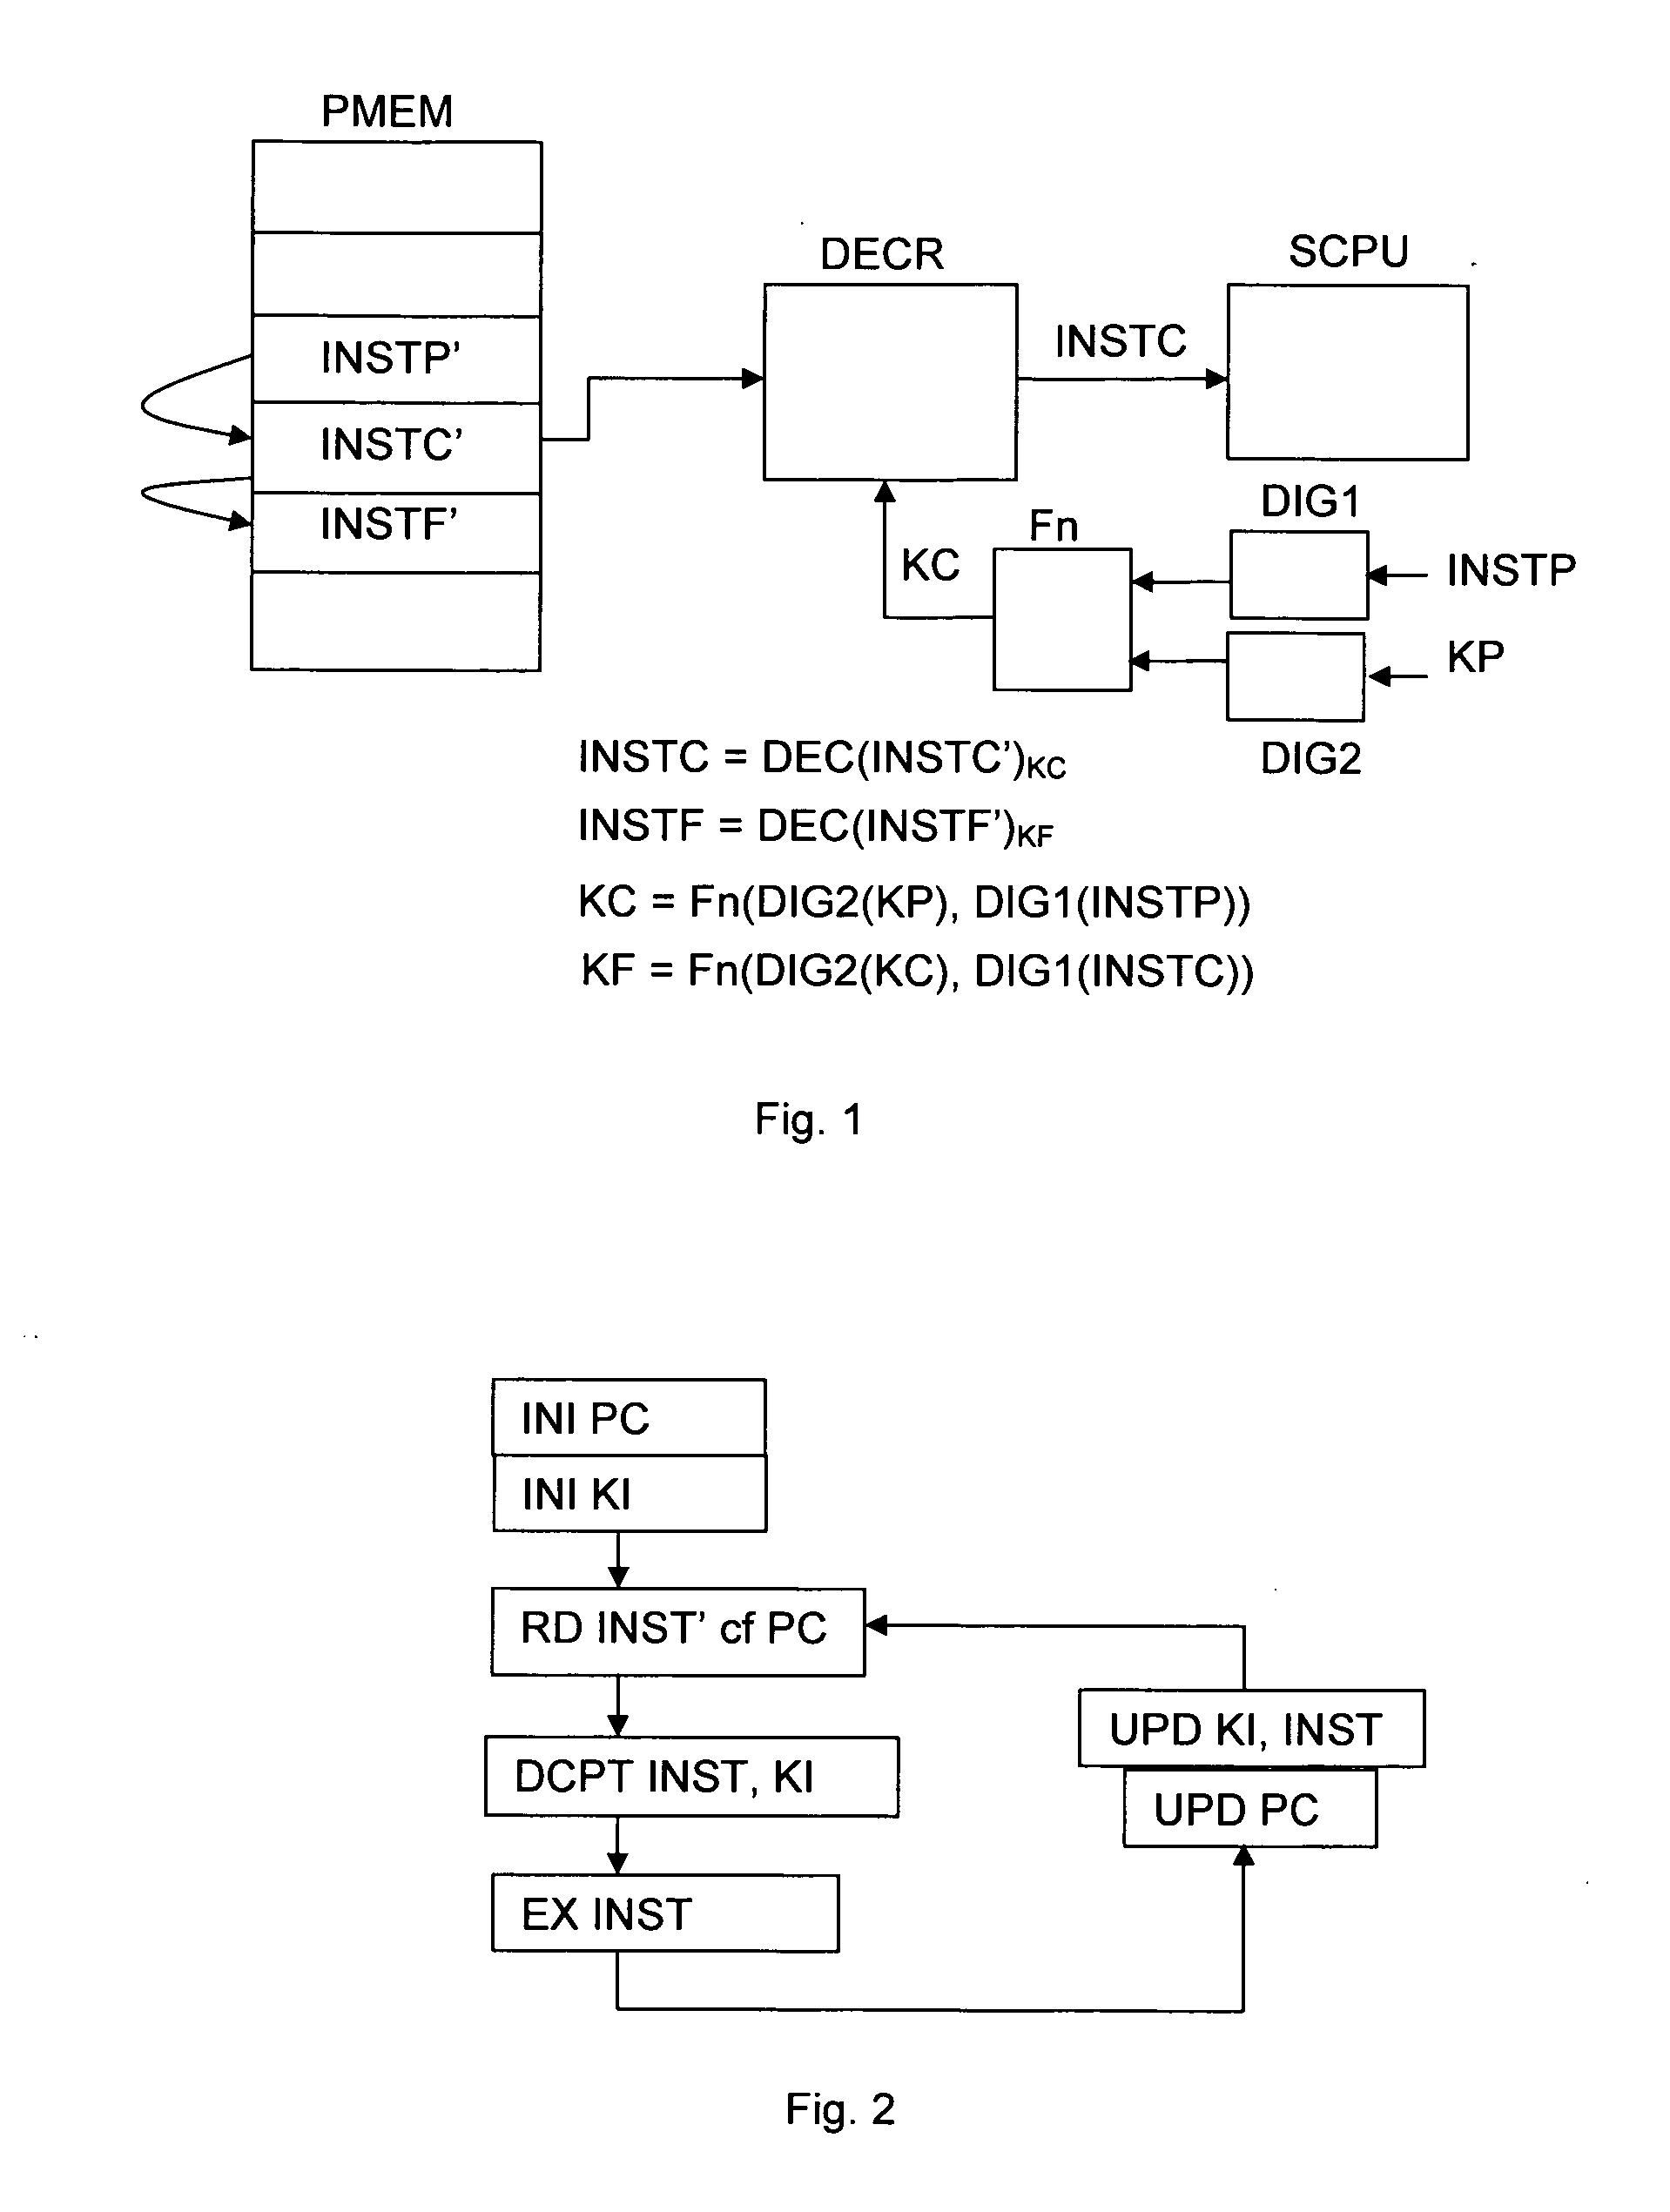 Processor-implemented method for ensuring software integrity